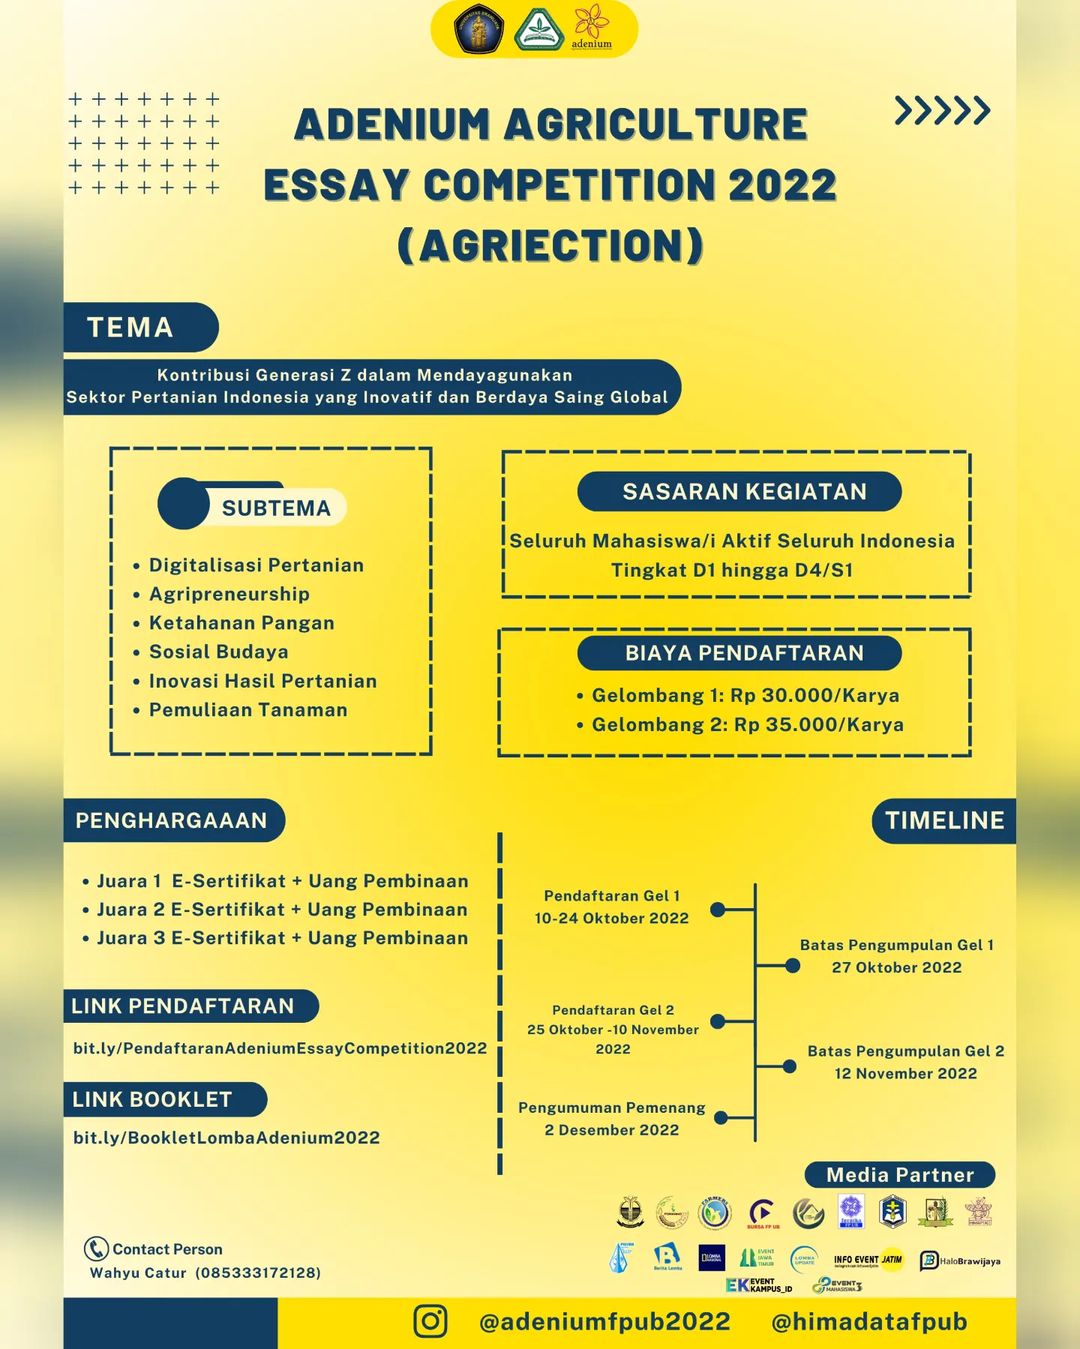 Adenium Agriculture Essay Competition AGRIECTION 2022